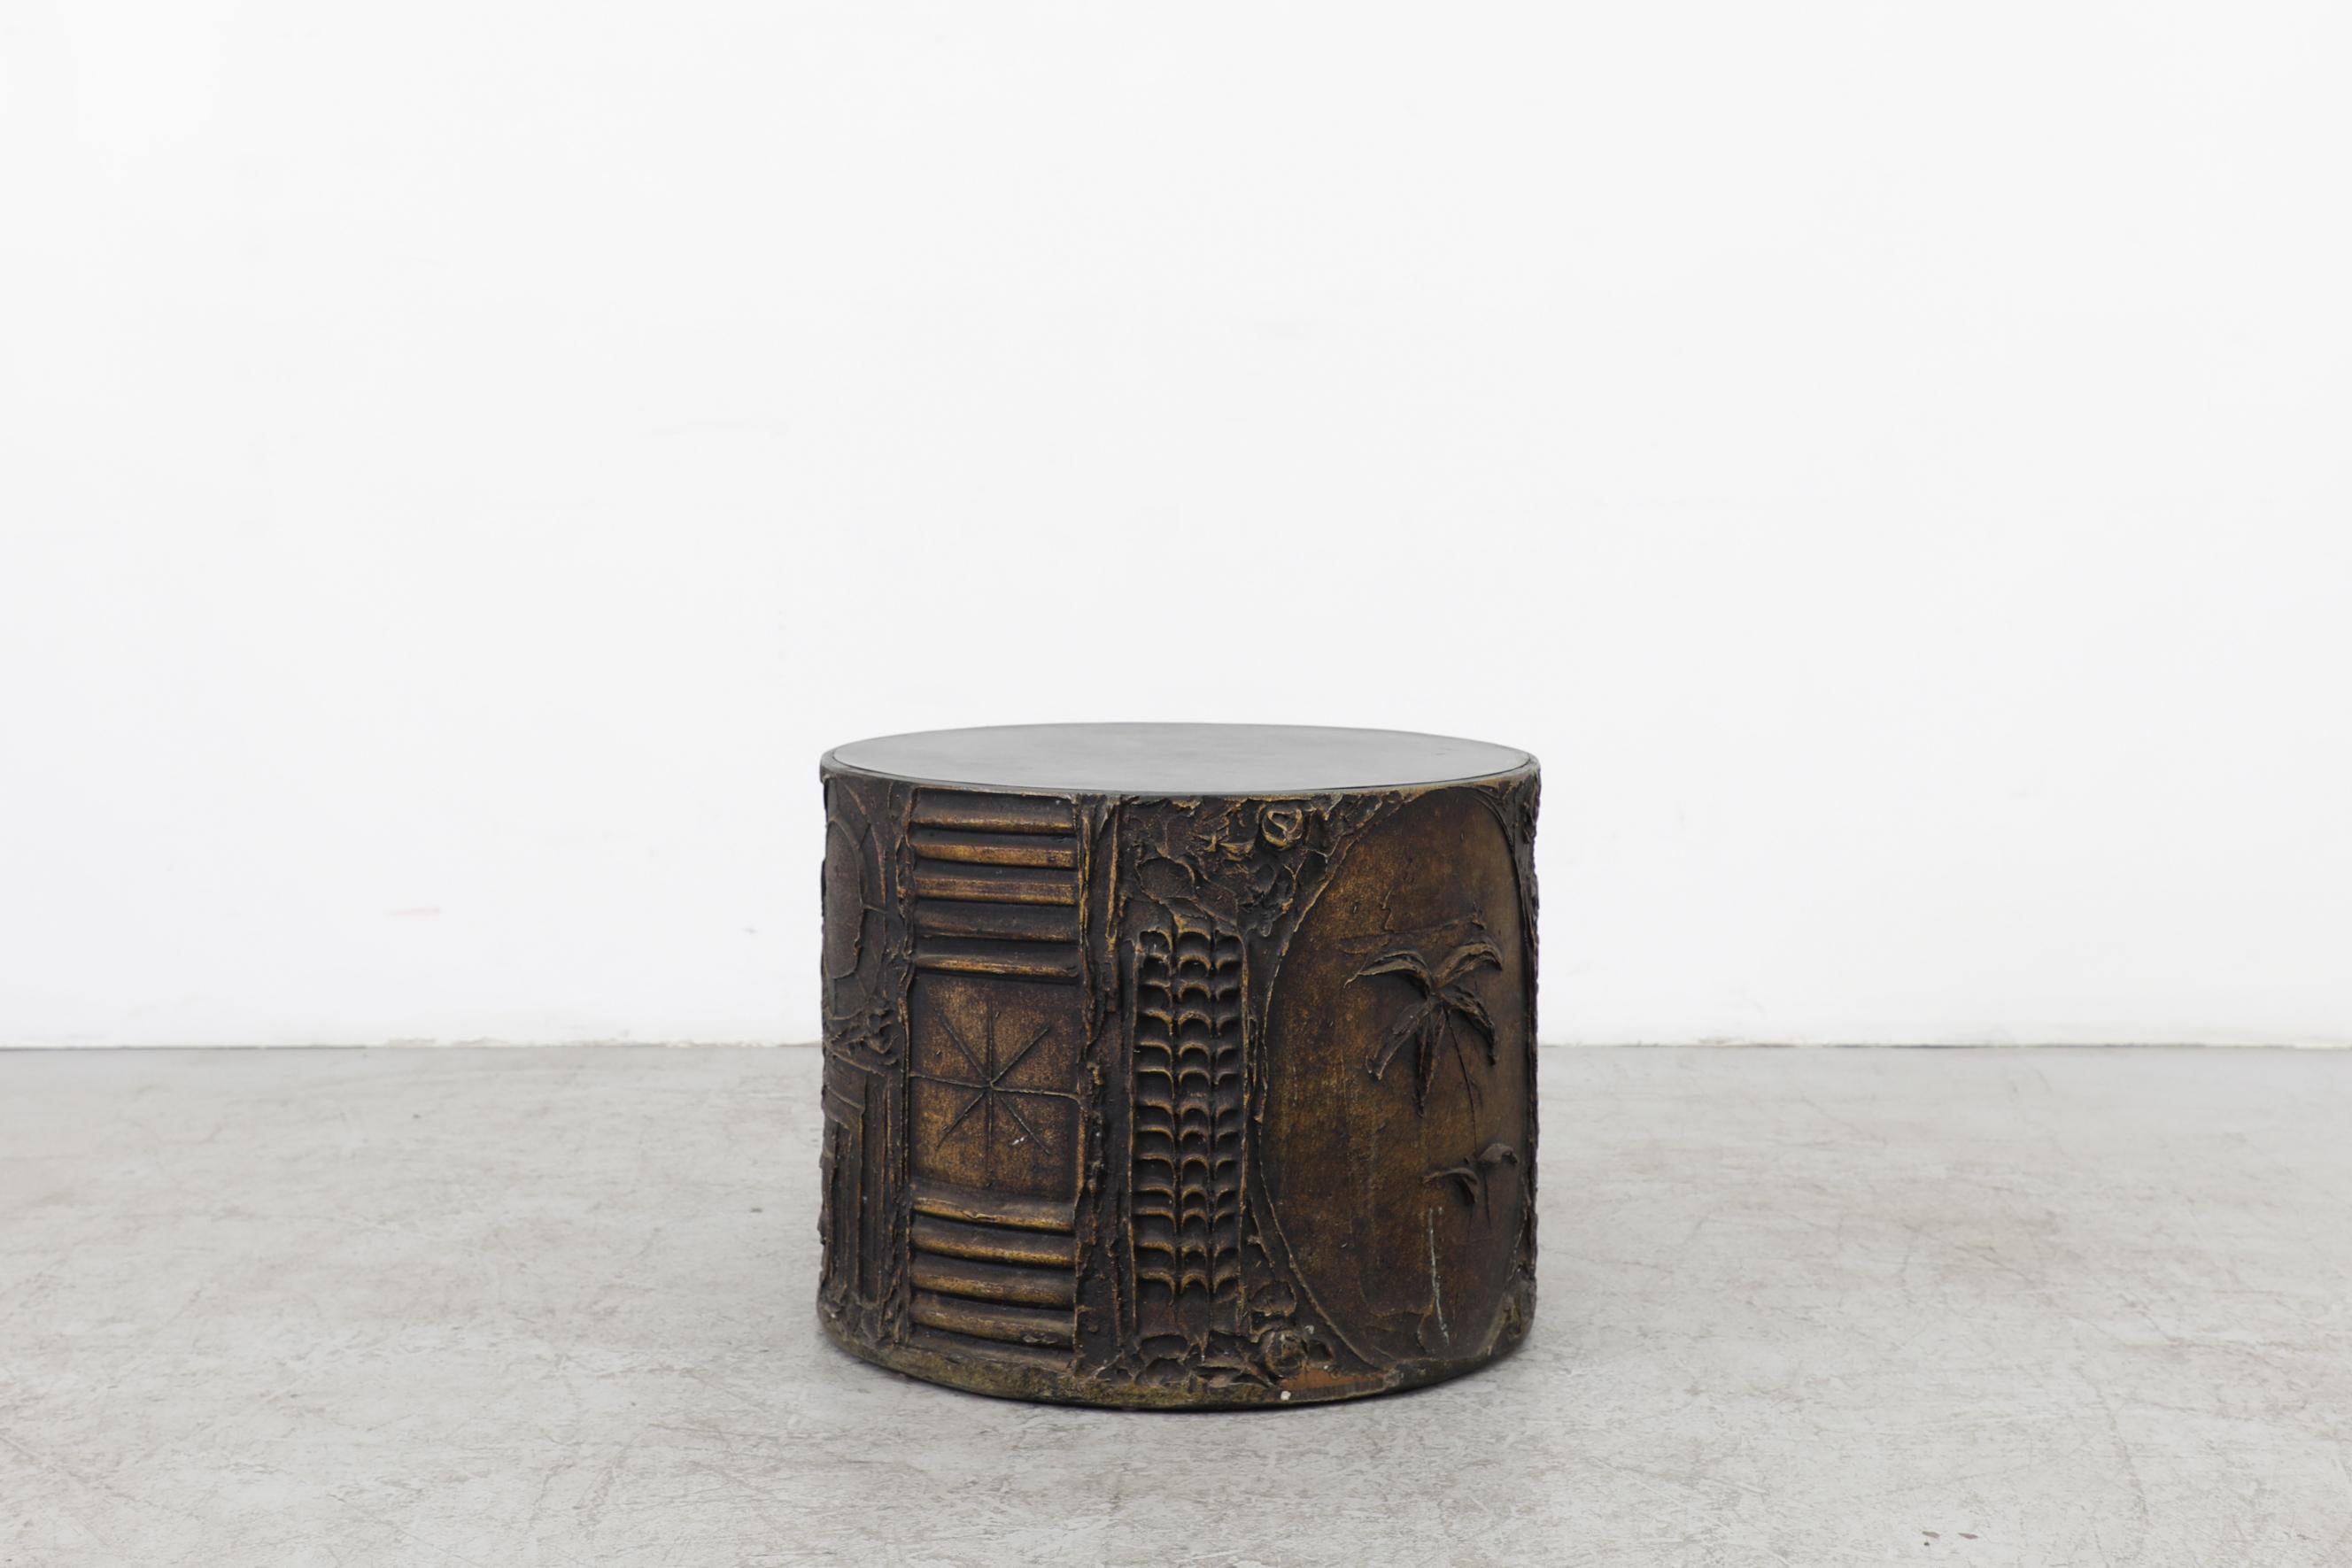 Architect-turned-furniture-designer Adrian Pearsall sculpted brutalist drum table with a black laminate top and cast resin decorative relief frame. Designed in the early half of the 1970s for his label 